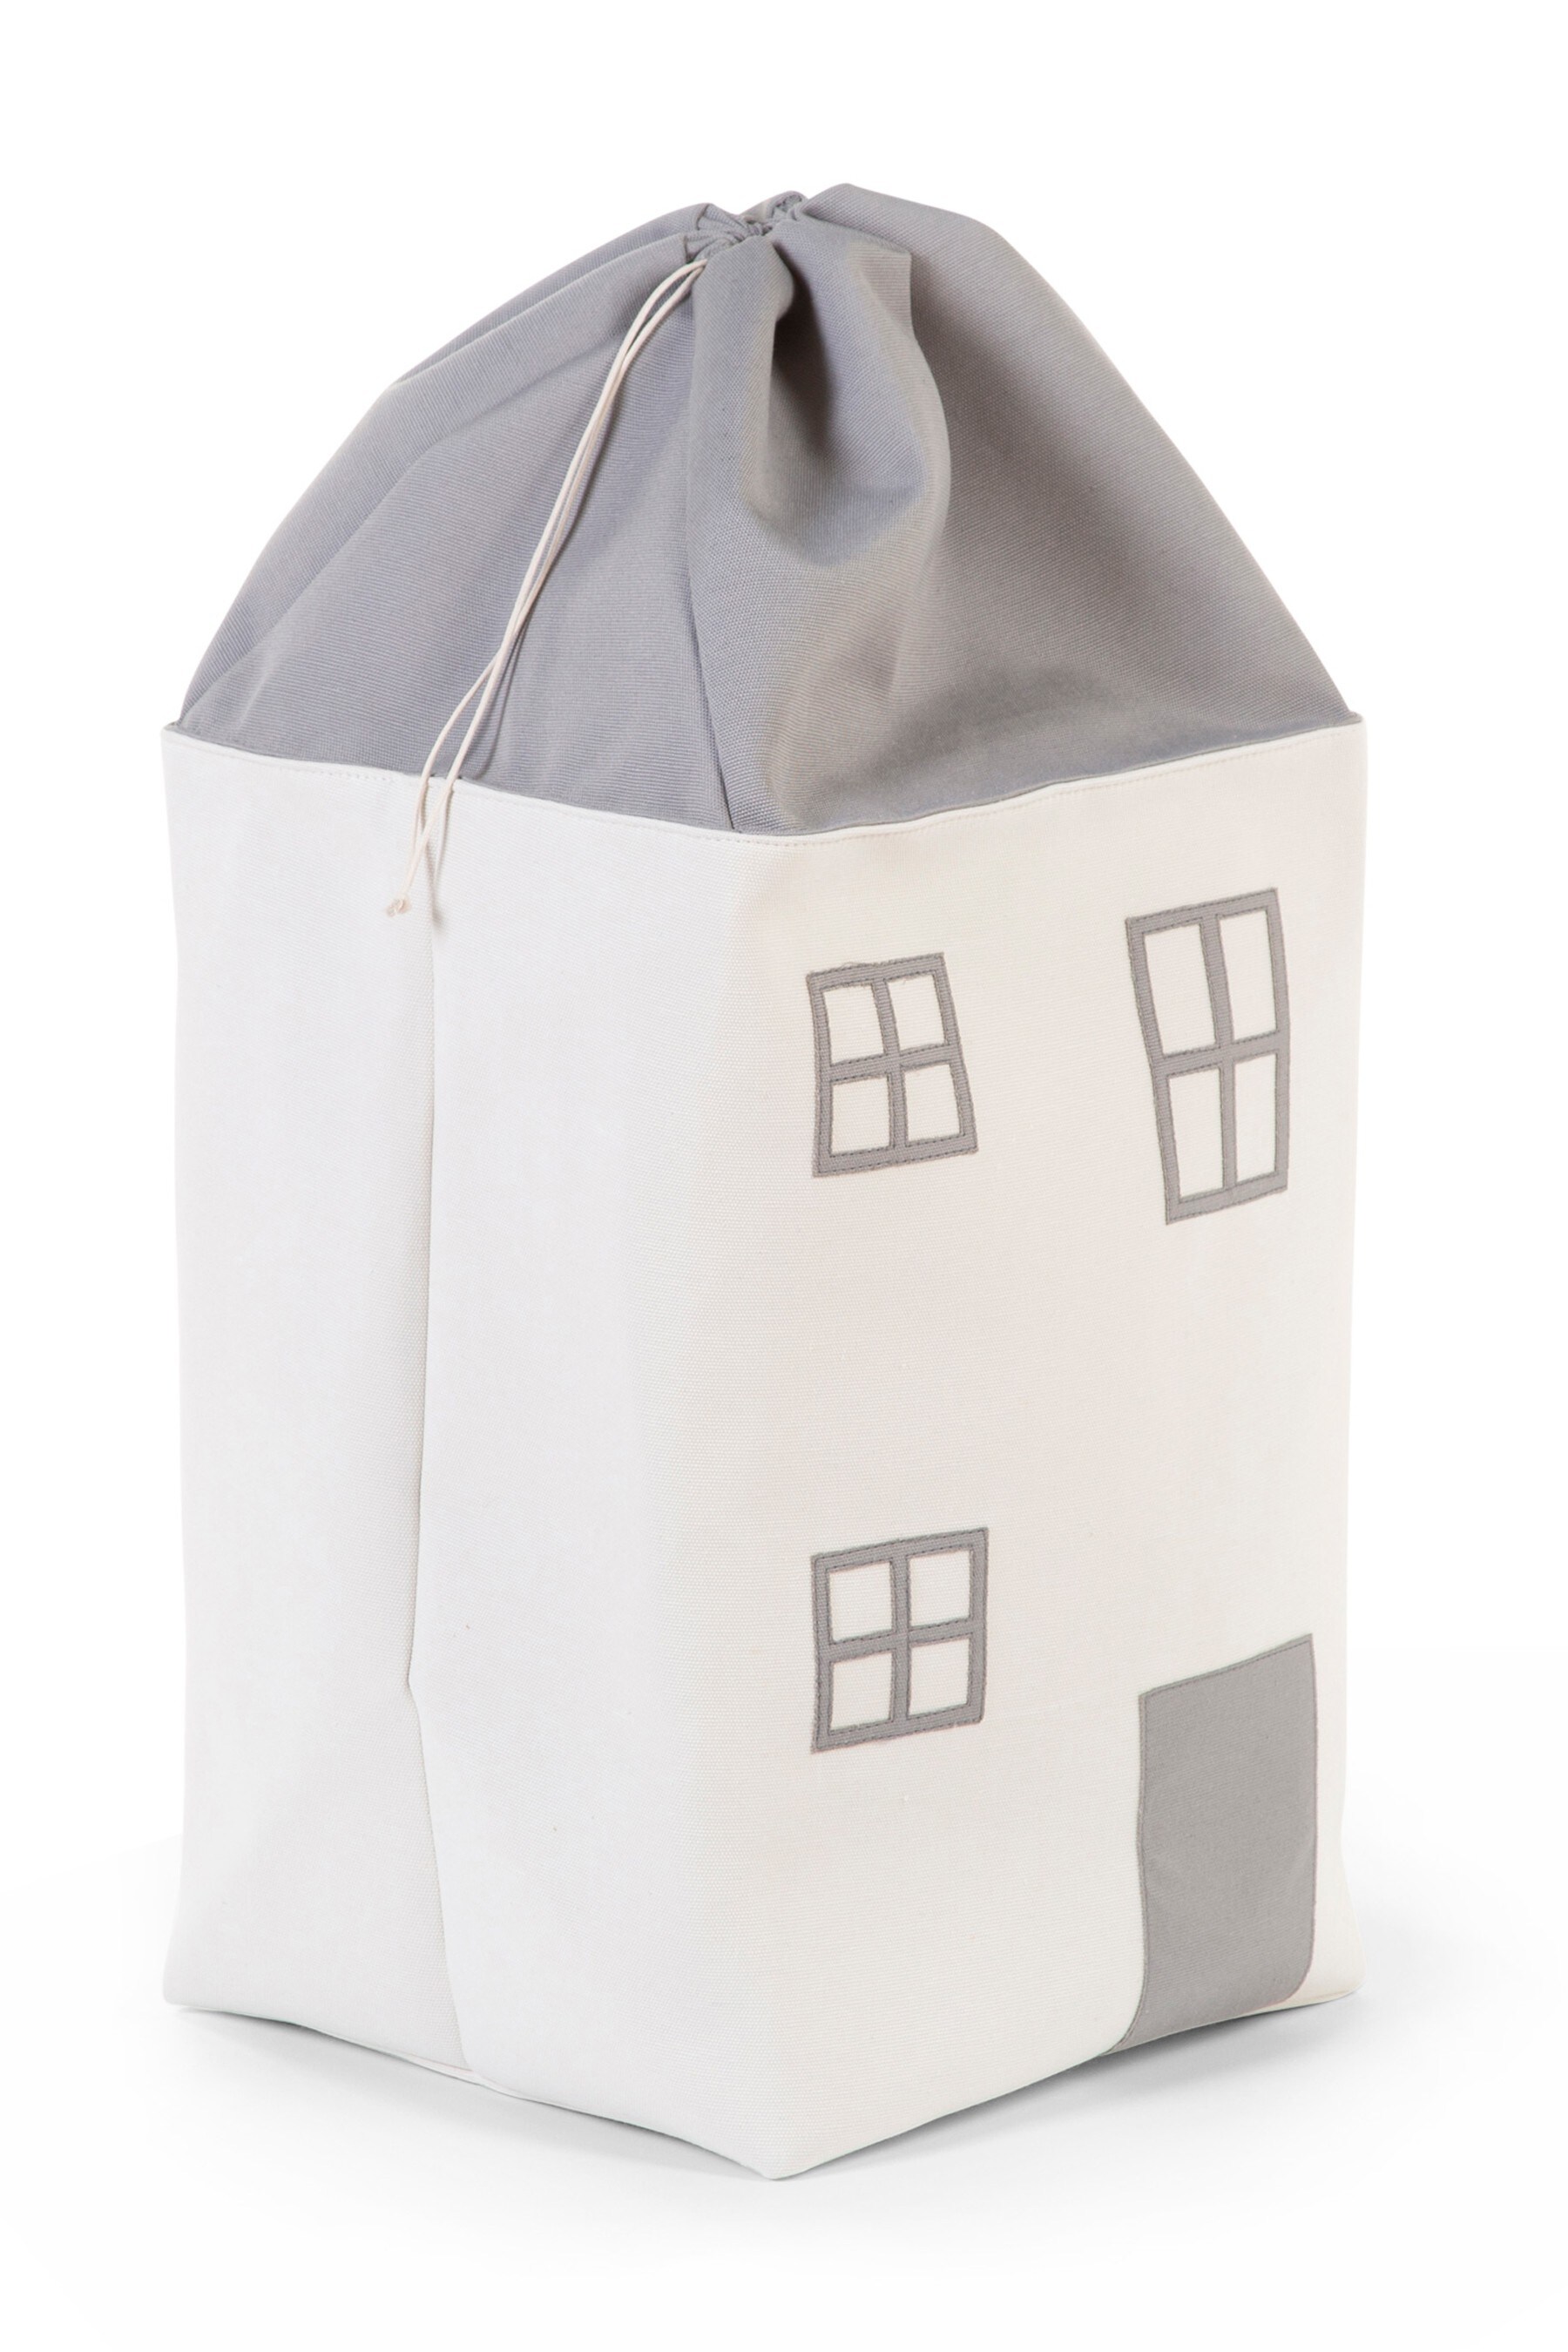 Buy Childhome White Toy House Storage Bag from the Next UK online shop